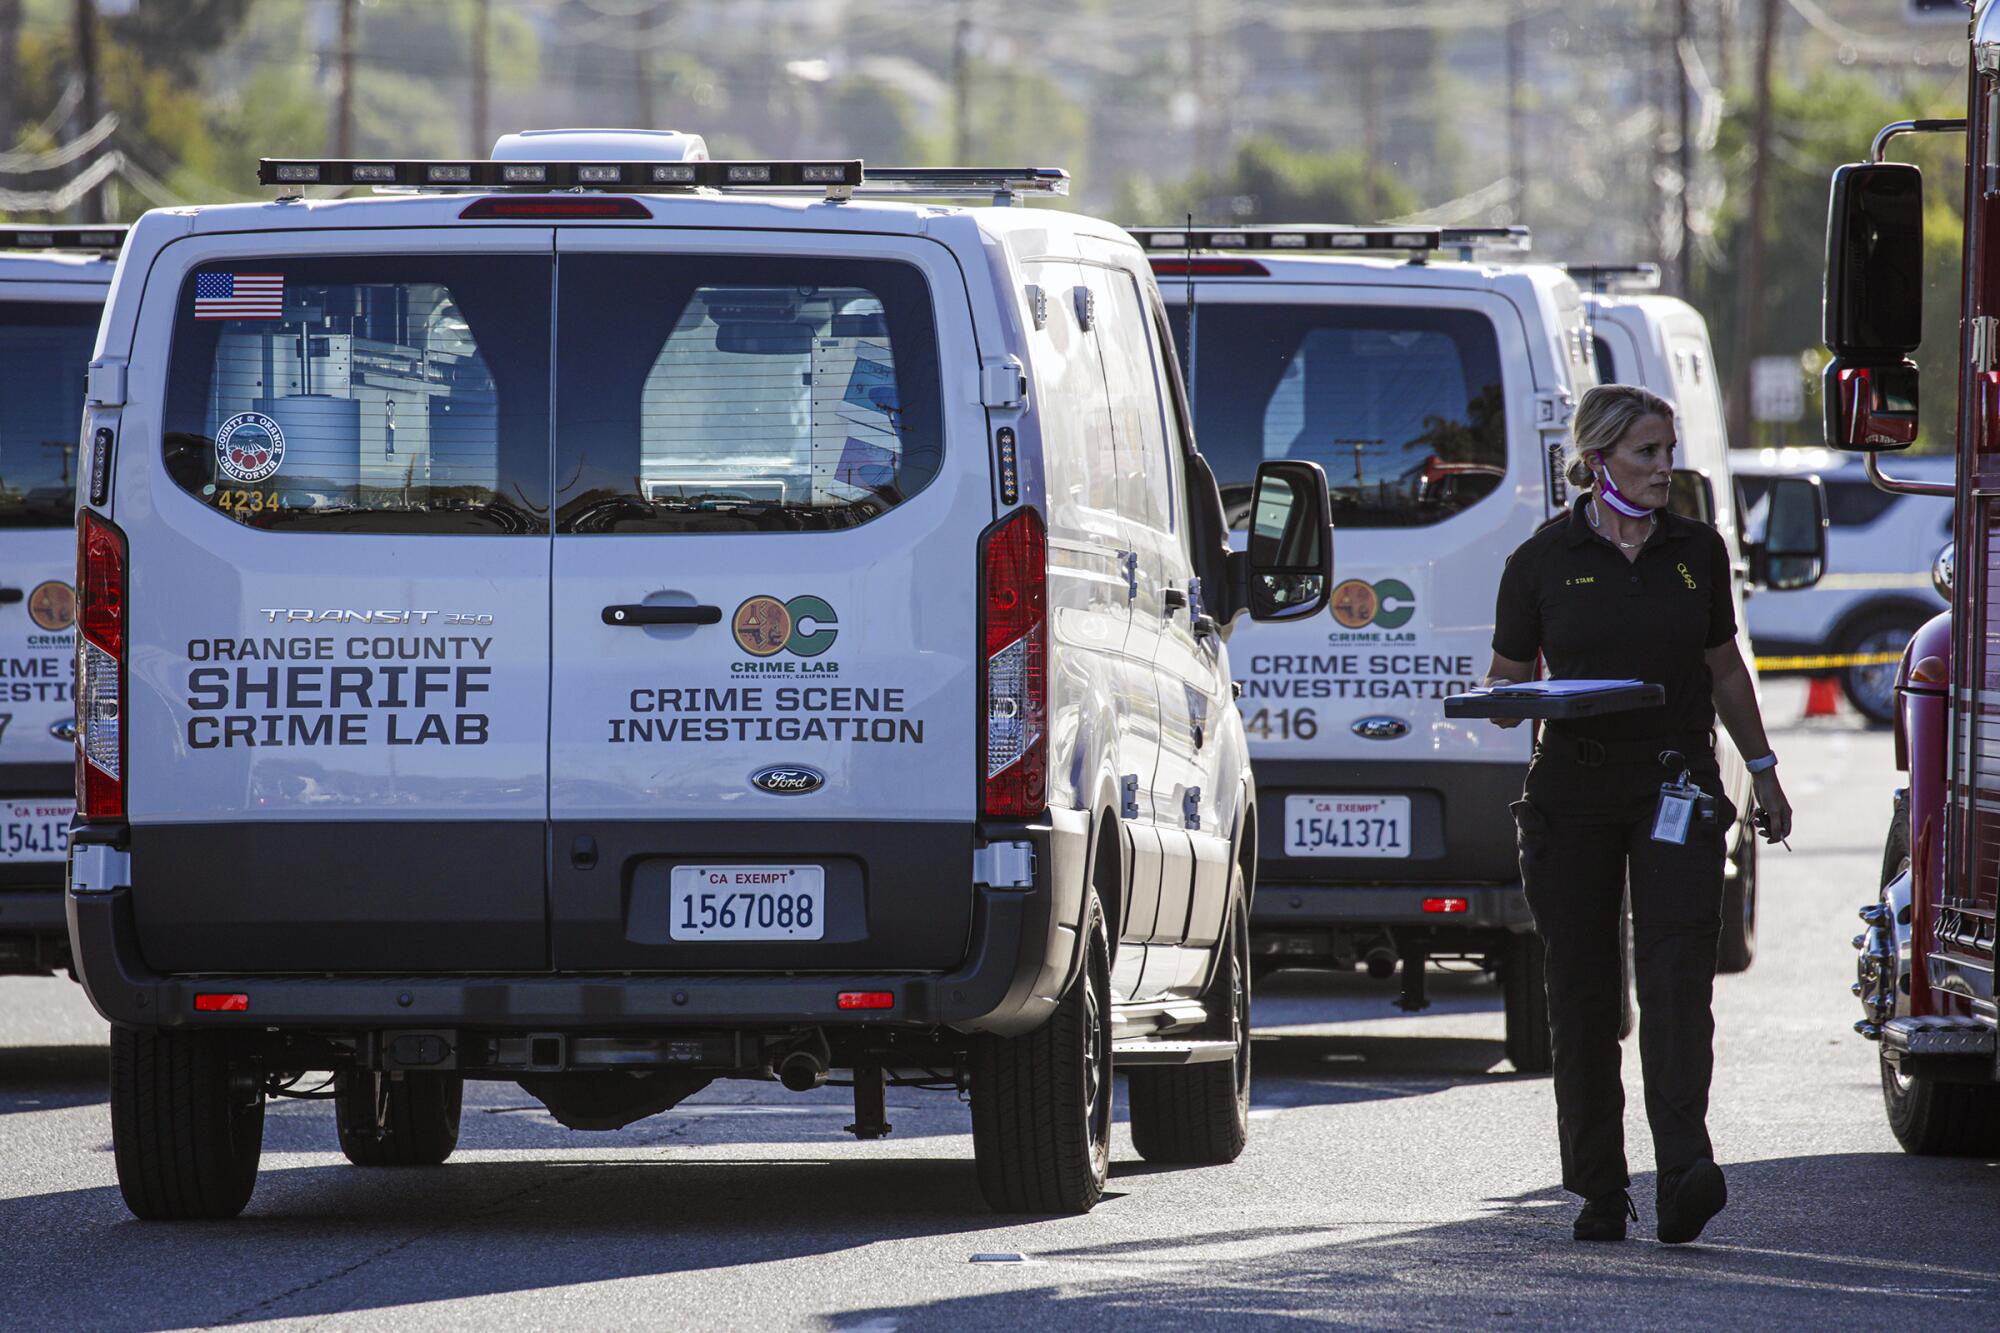 A woman with a clipboard walks alongside a van marked "Orange County sheriff crime lab: Crime scene investigation."